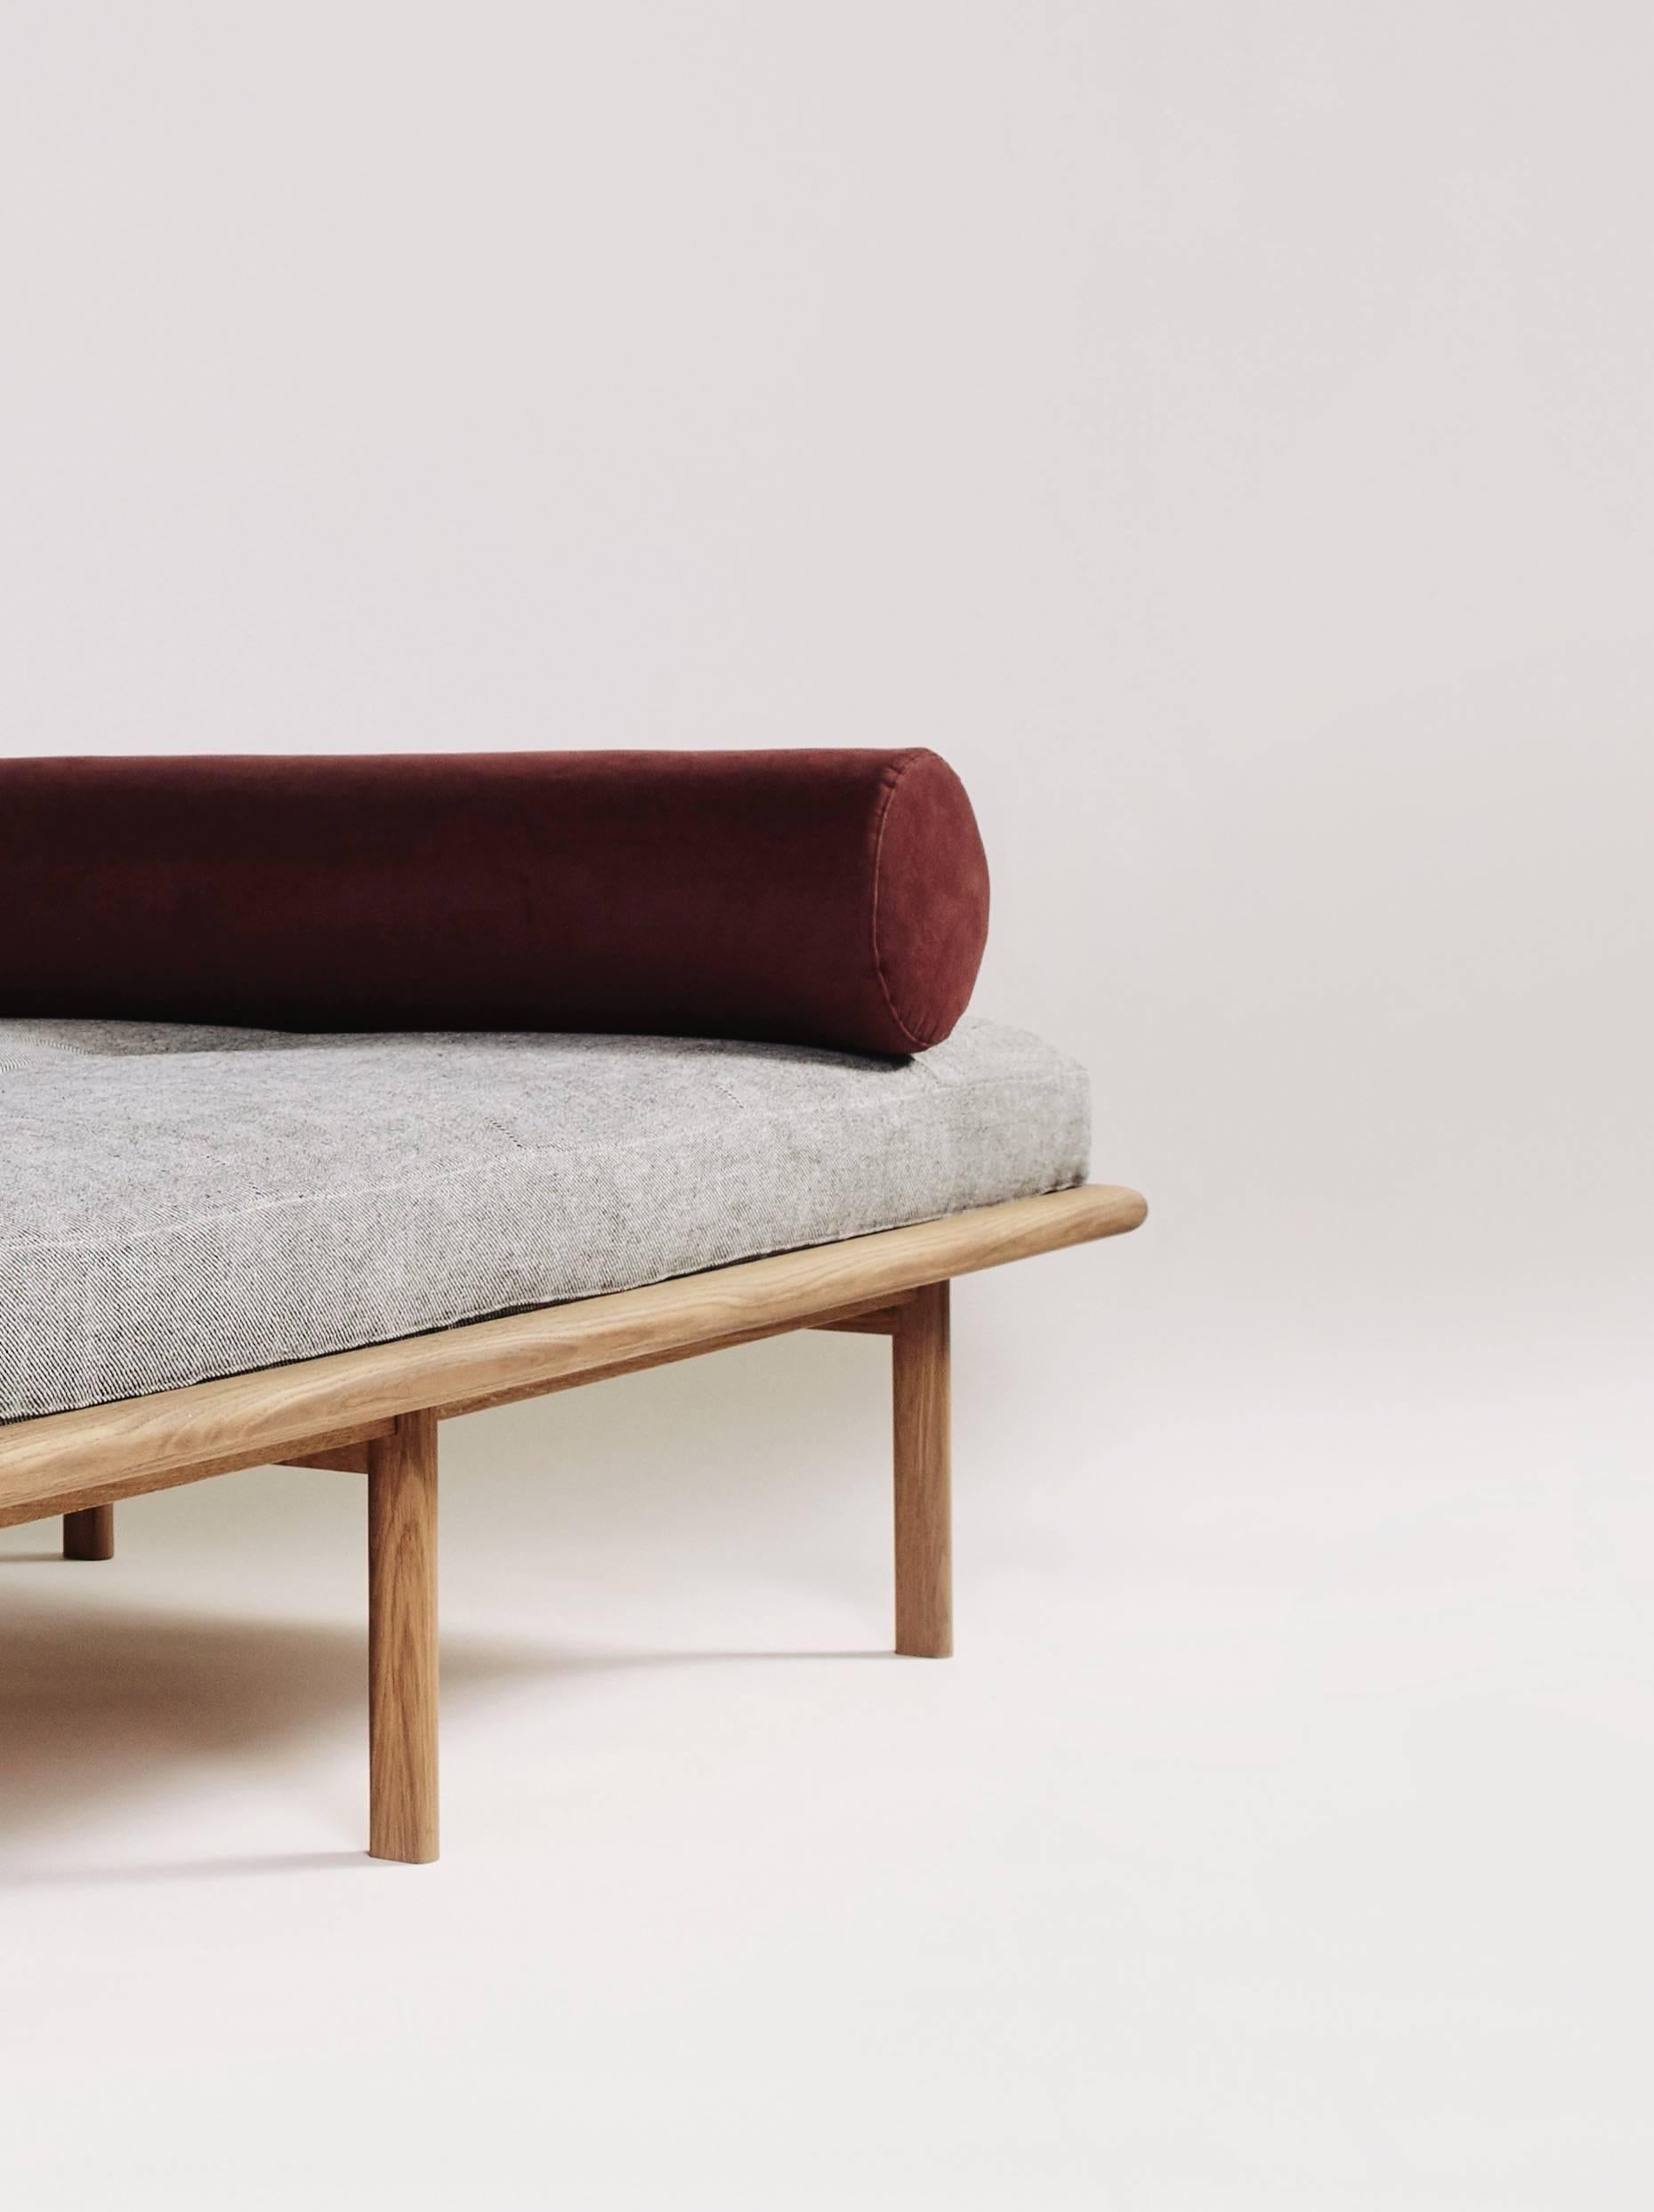 Scandinavian minimalism and luxurious texture come together in this six-legged modern daybed. The white-oak base is comprised of a rounded-edge frame and distinctively hand-shaped legs, which taper on two sides. The plush cushion features centred